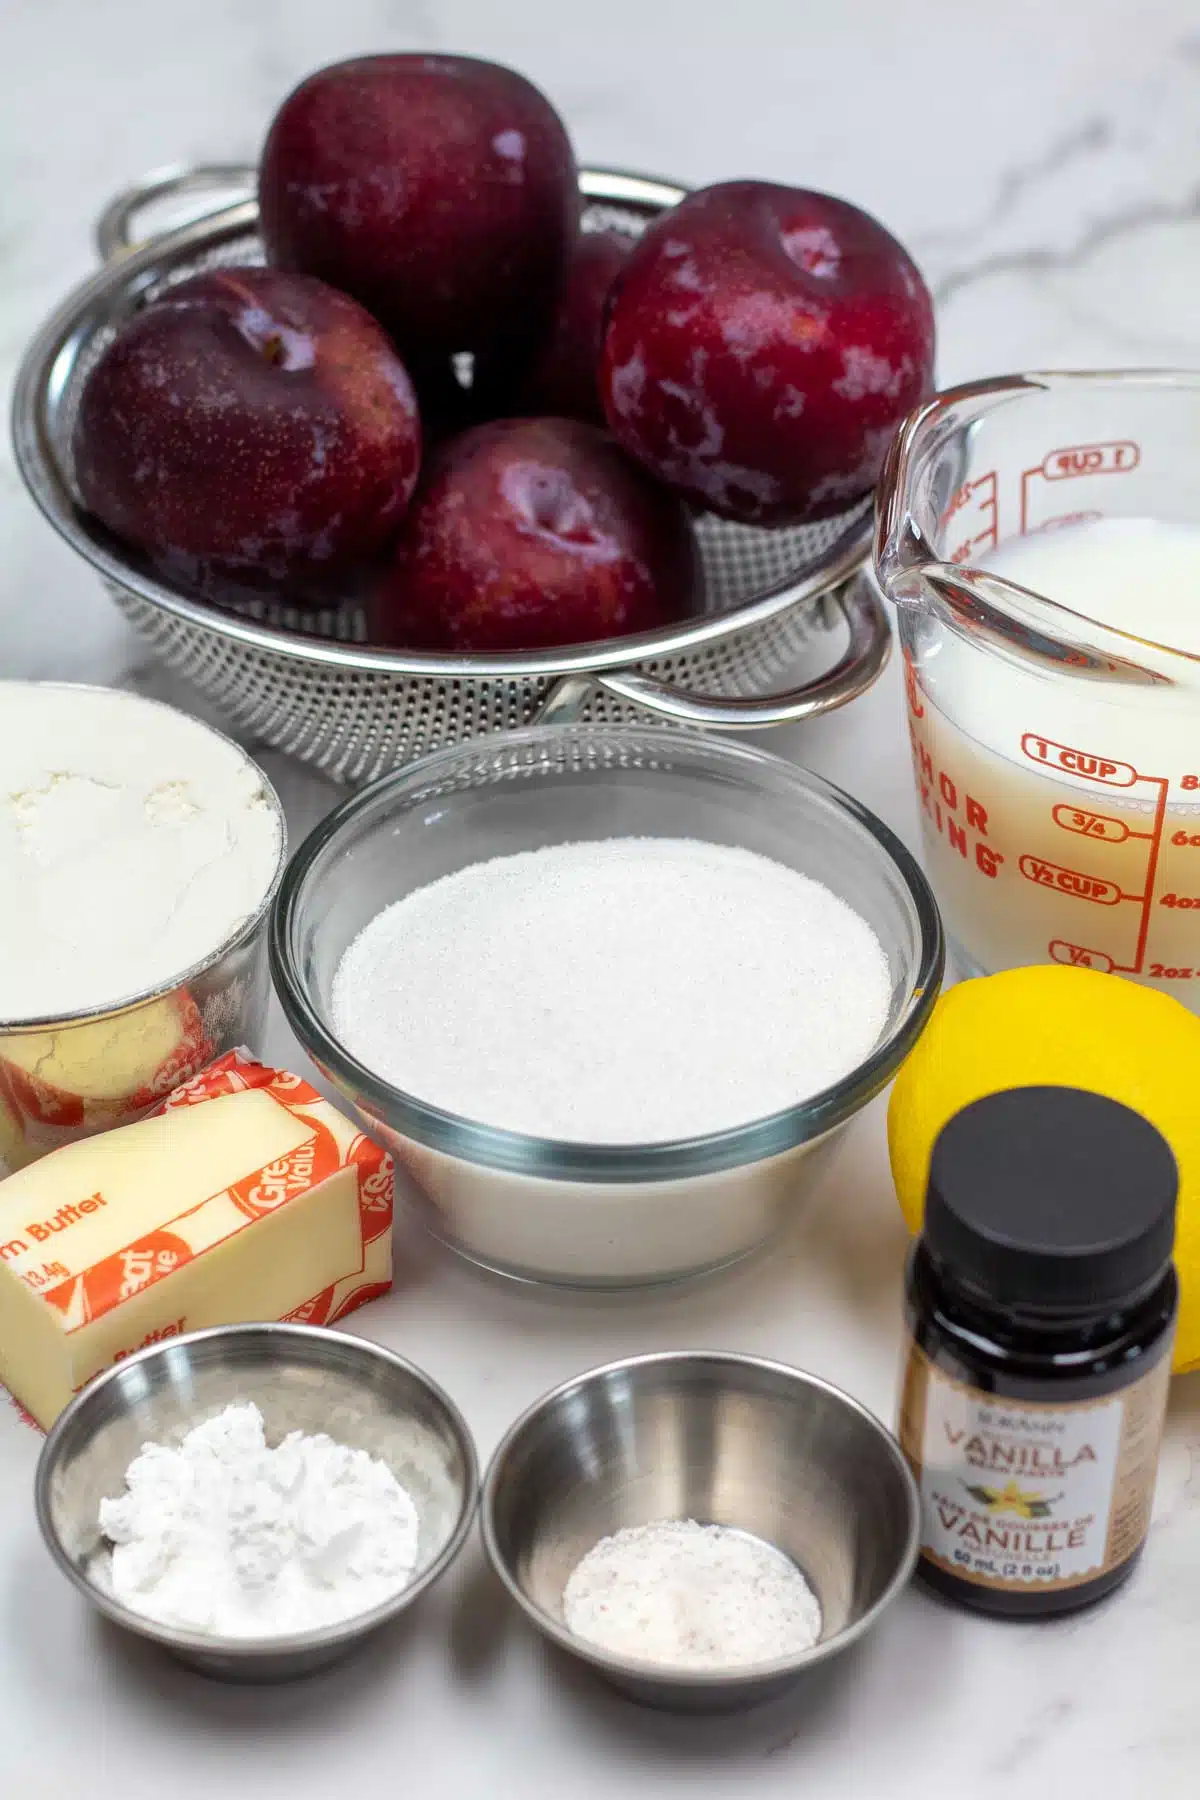 Tall image showing ingredients needed for plum cobbler.